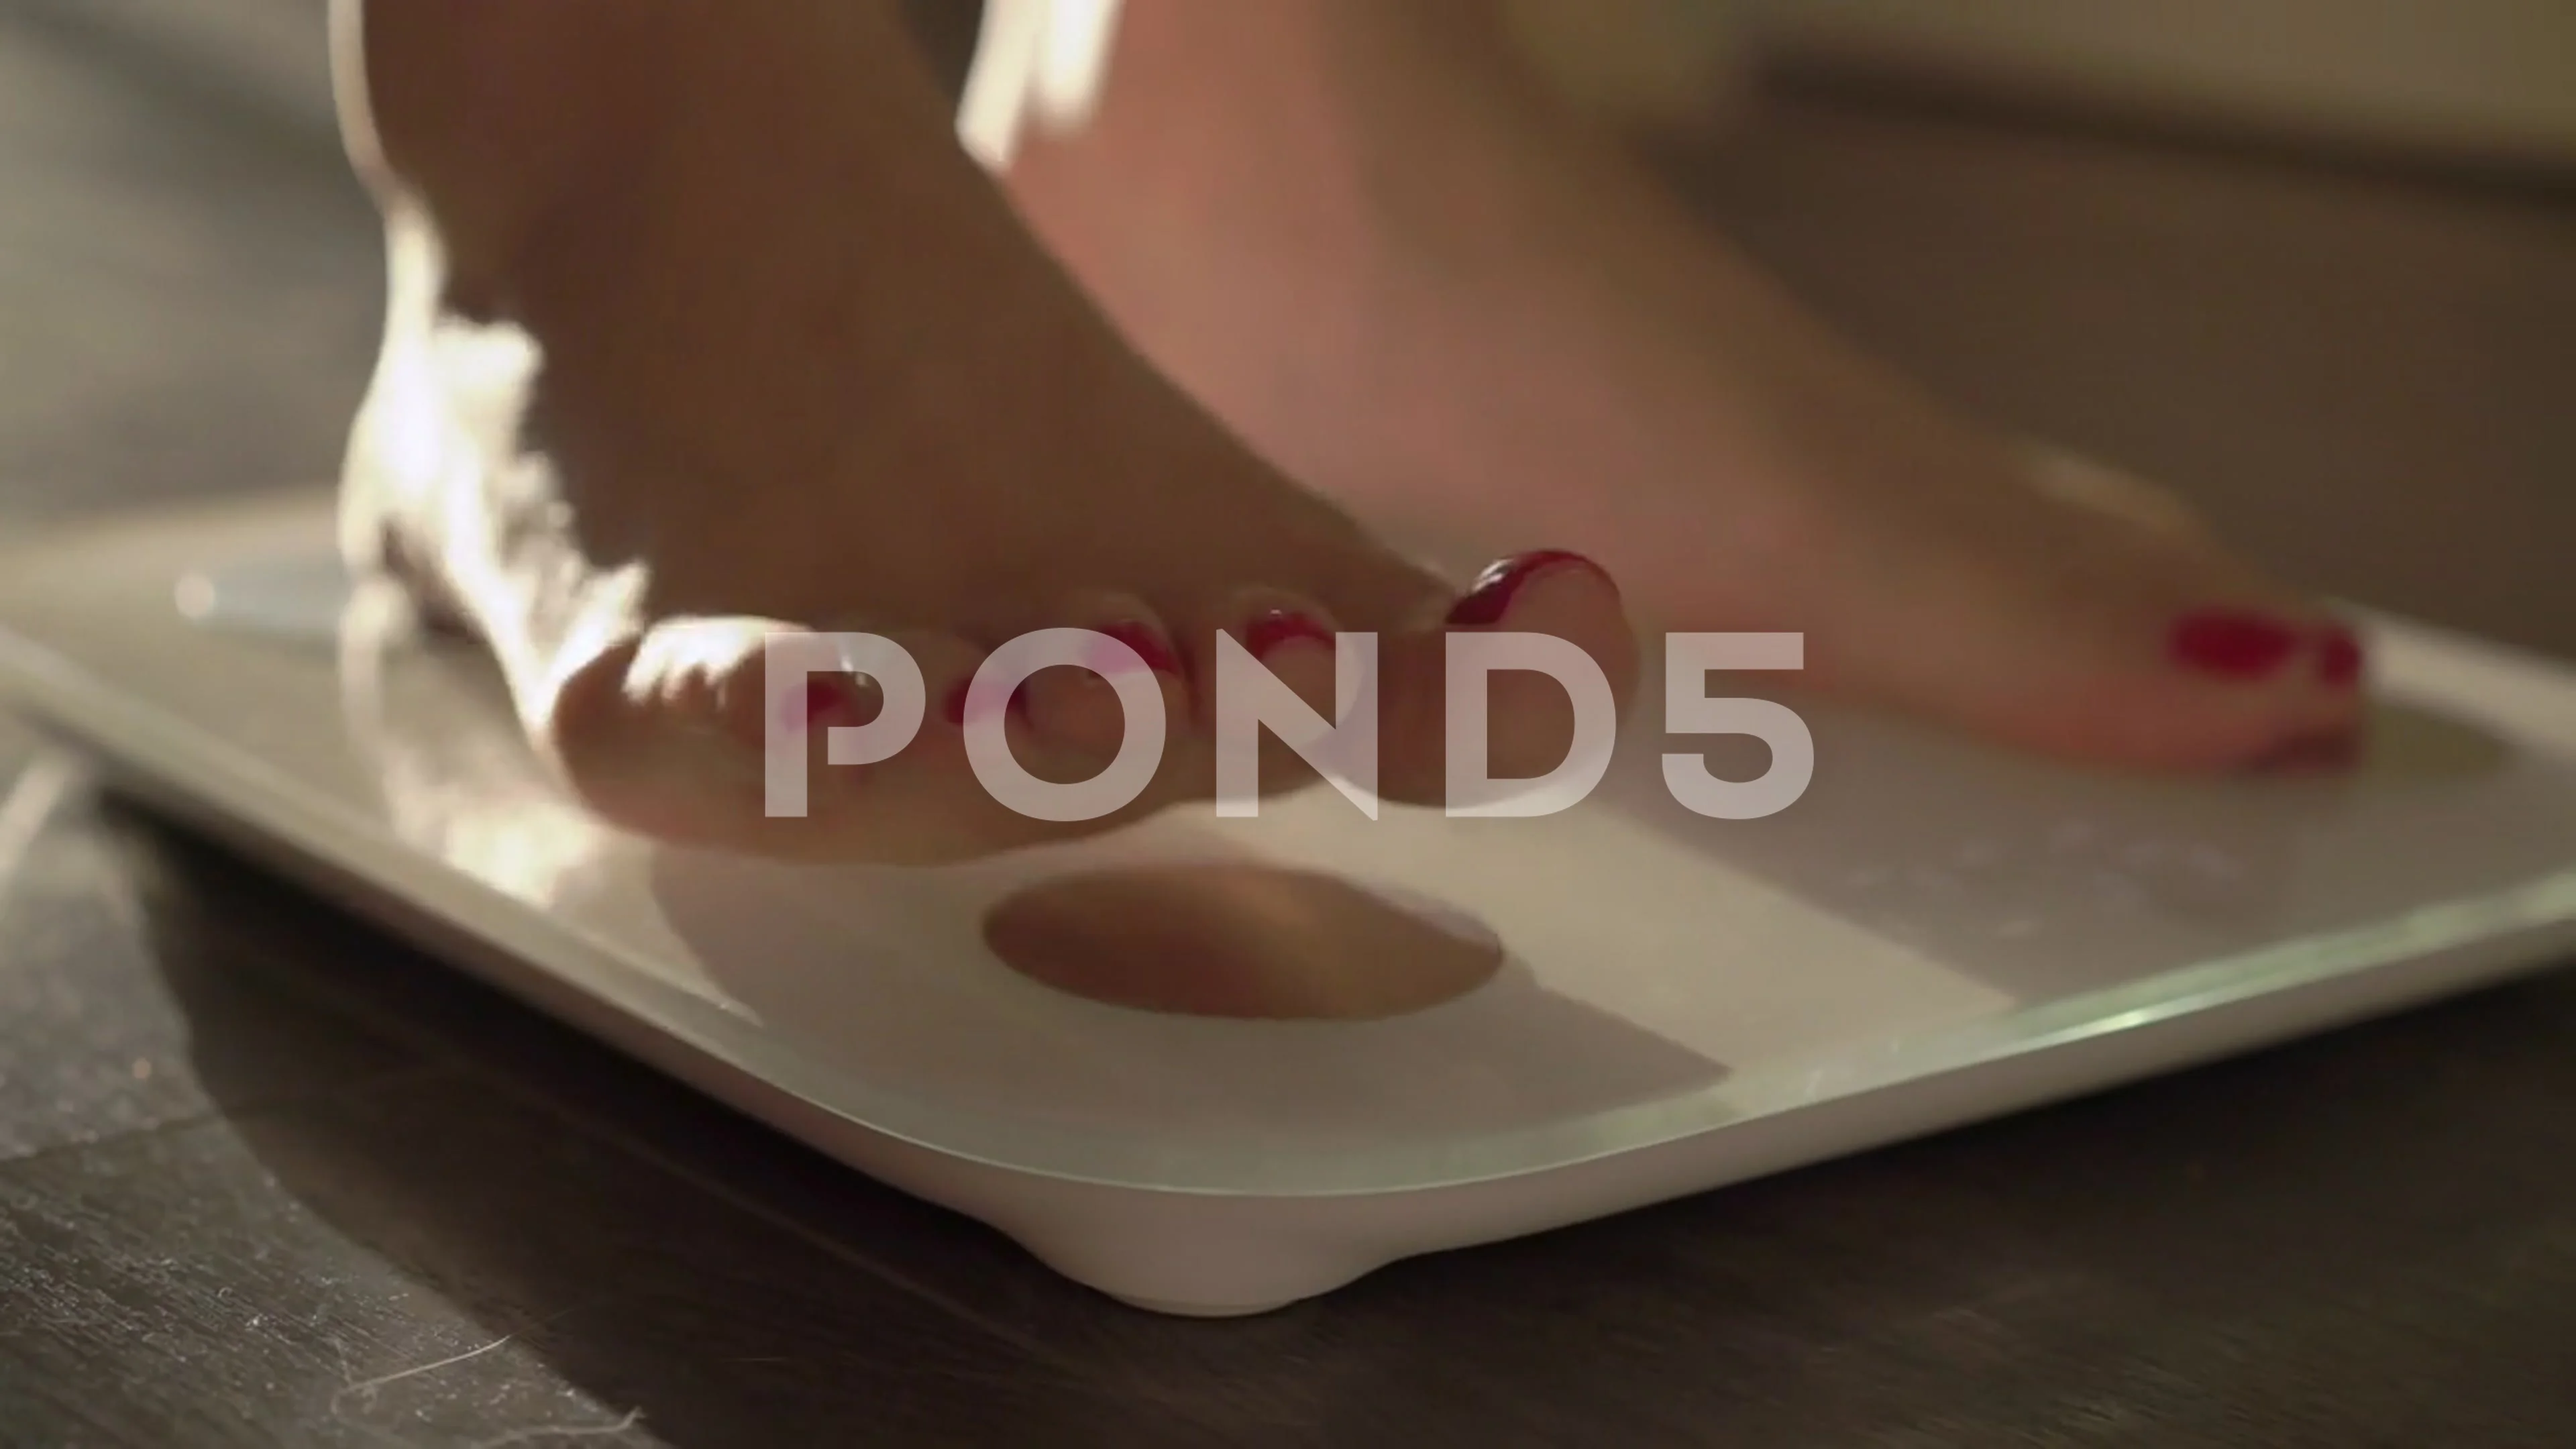 https://images.pond5.com/young-woman-stands-white-electronic-footage-169791438_prevstill.jpeg